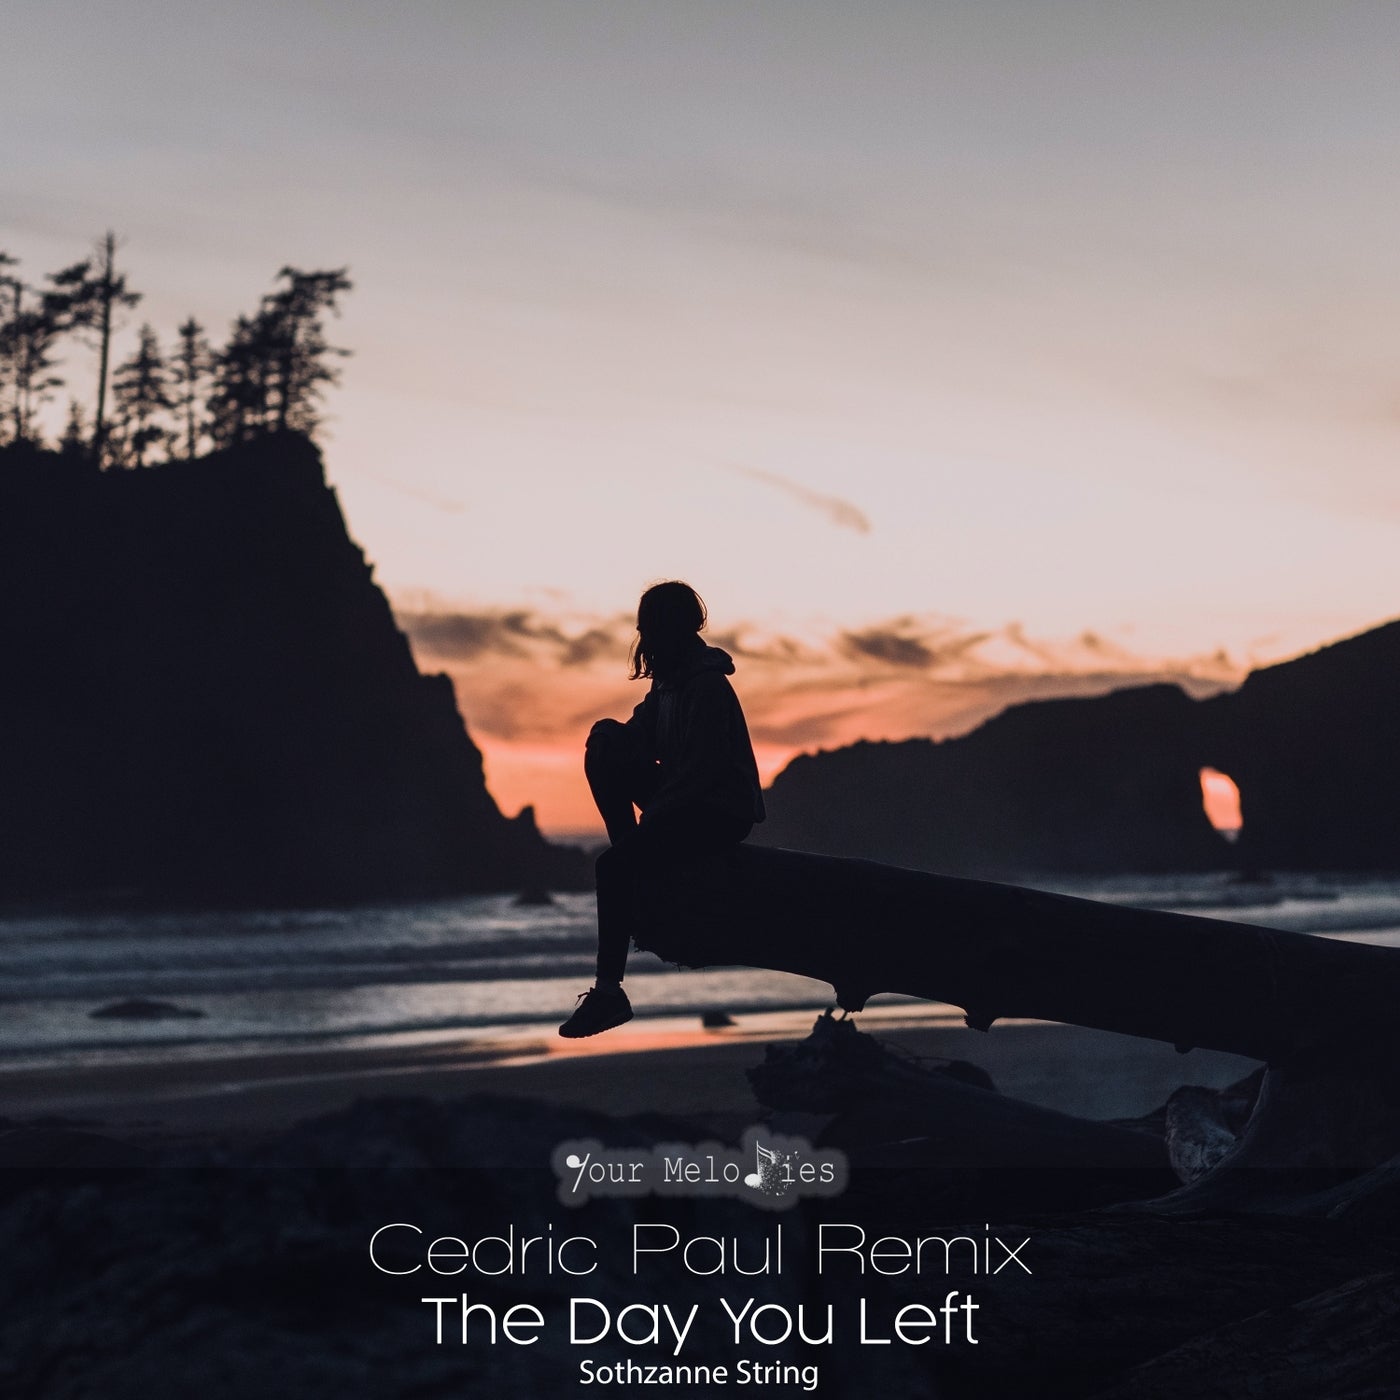 The Day You Left (Cedric Paul Remix)